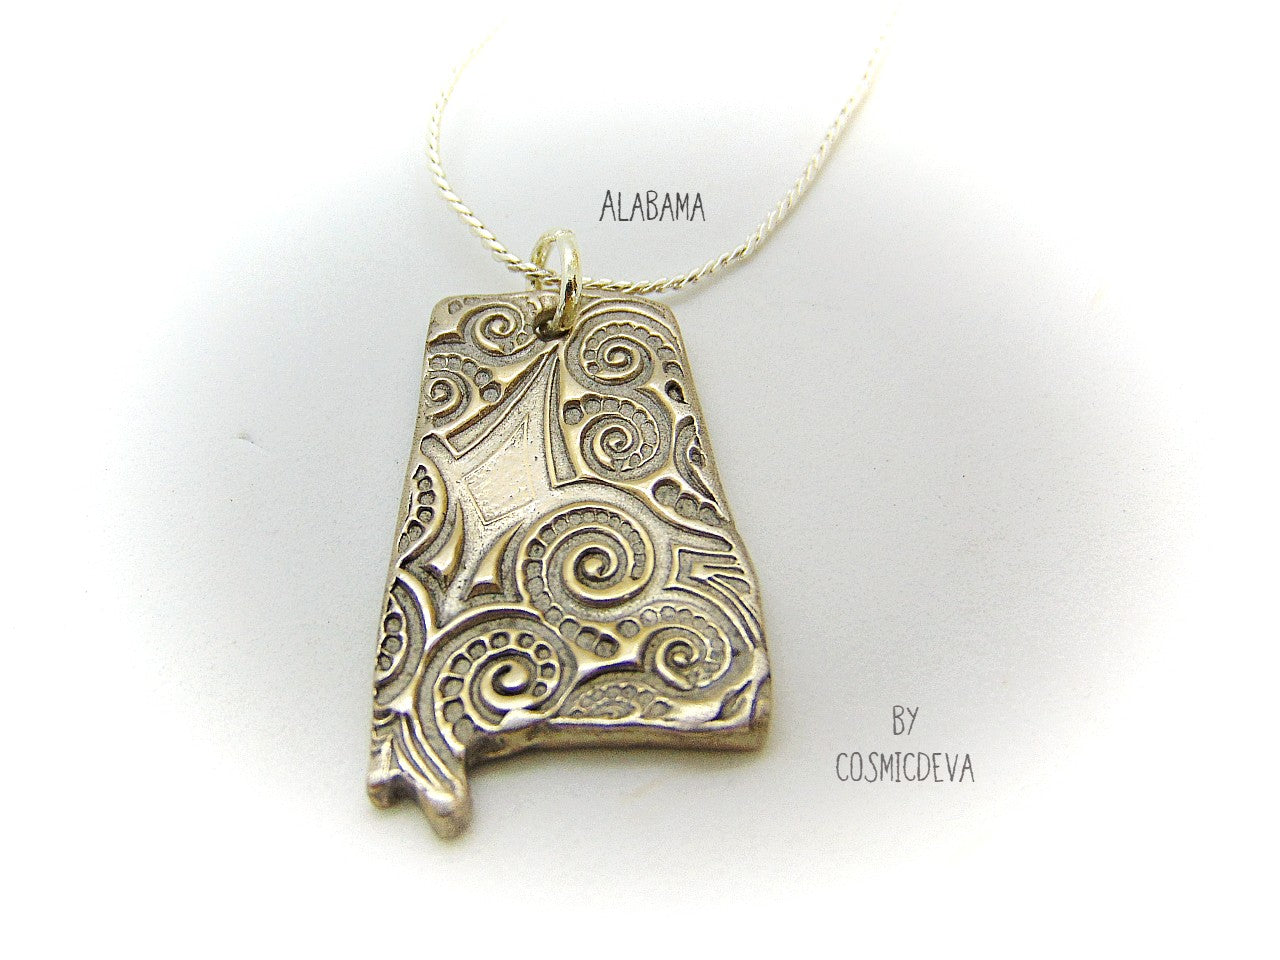 handcrafted and kiln fired Alabama State shaped pendant made of silver bronze.  This Alabama pendant dangles from a 20-inch silver plated chain.  The backside of the pendant is signed by CosmicDeva.